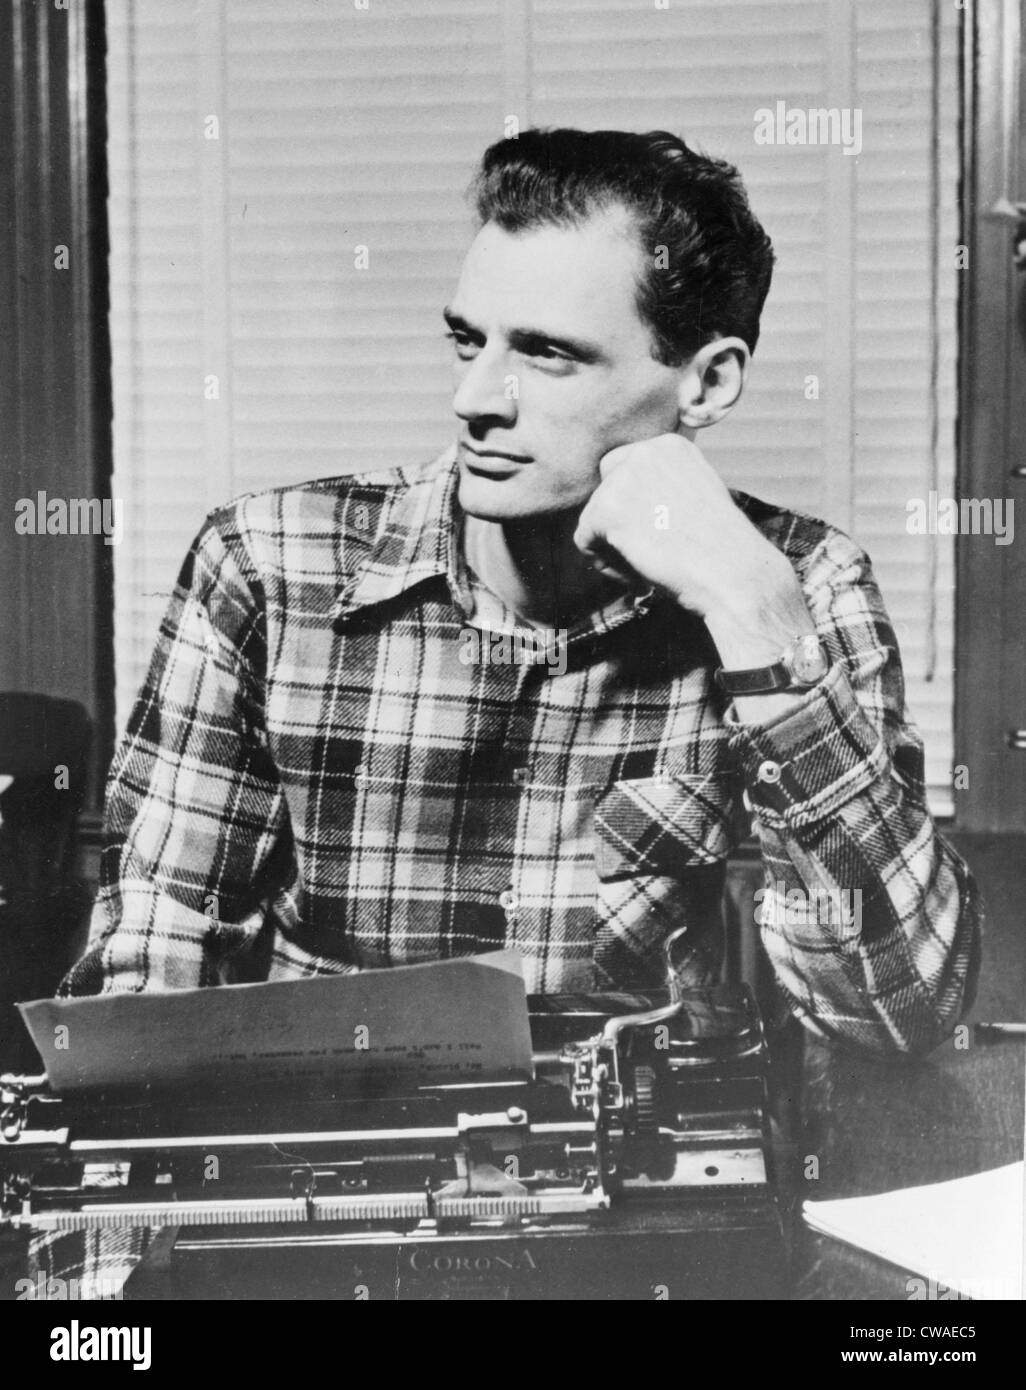 Arthur Miller (1915-2005) American playwright won the Pulitzer Prize for DEATH OF A SALESMAN (1948). Stock Photo